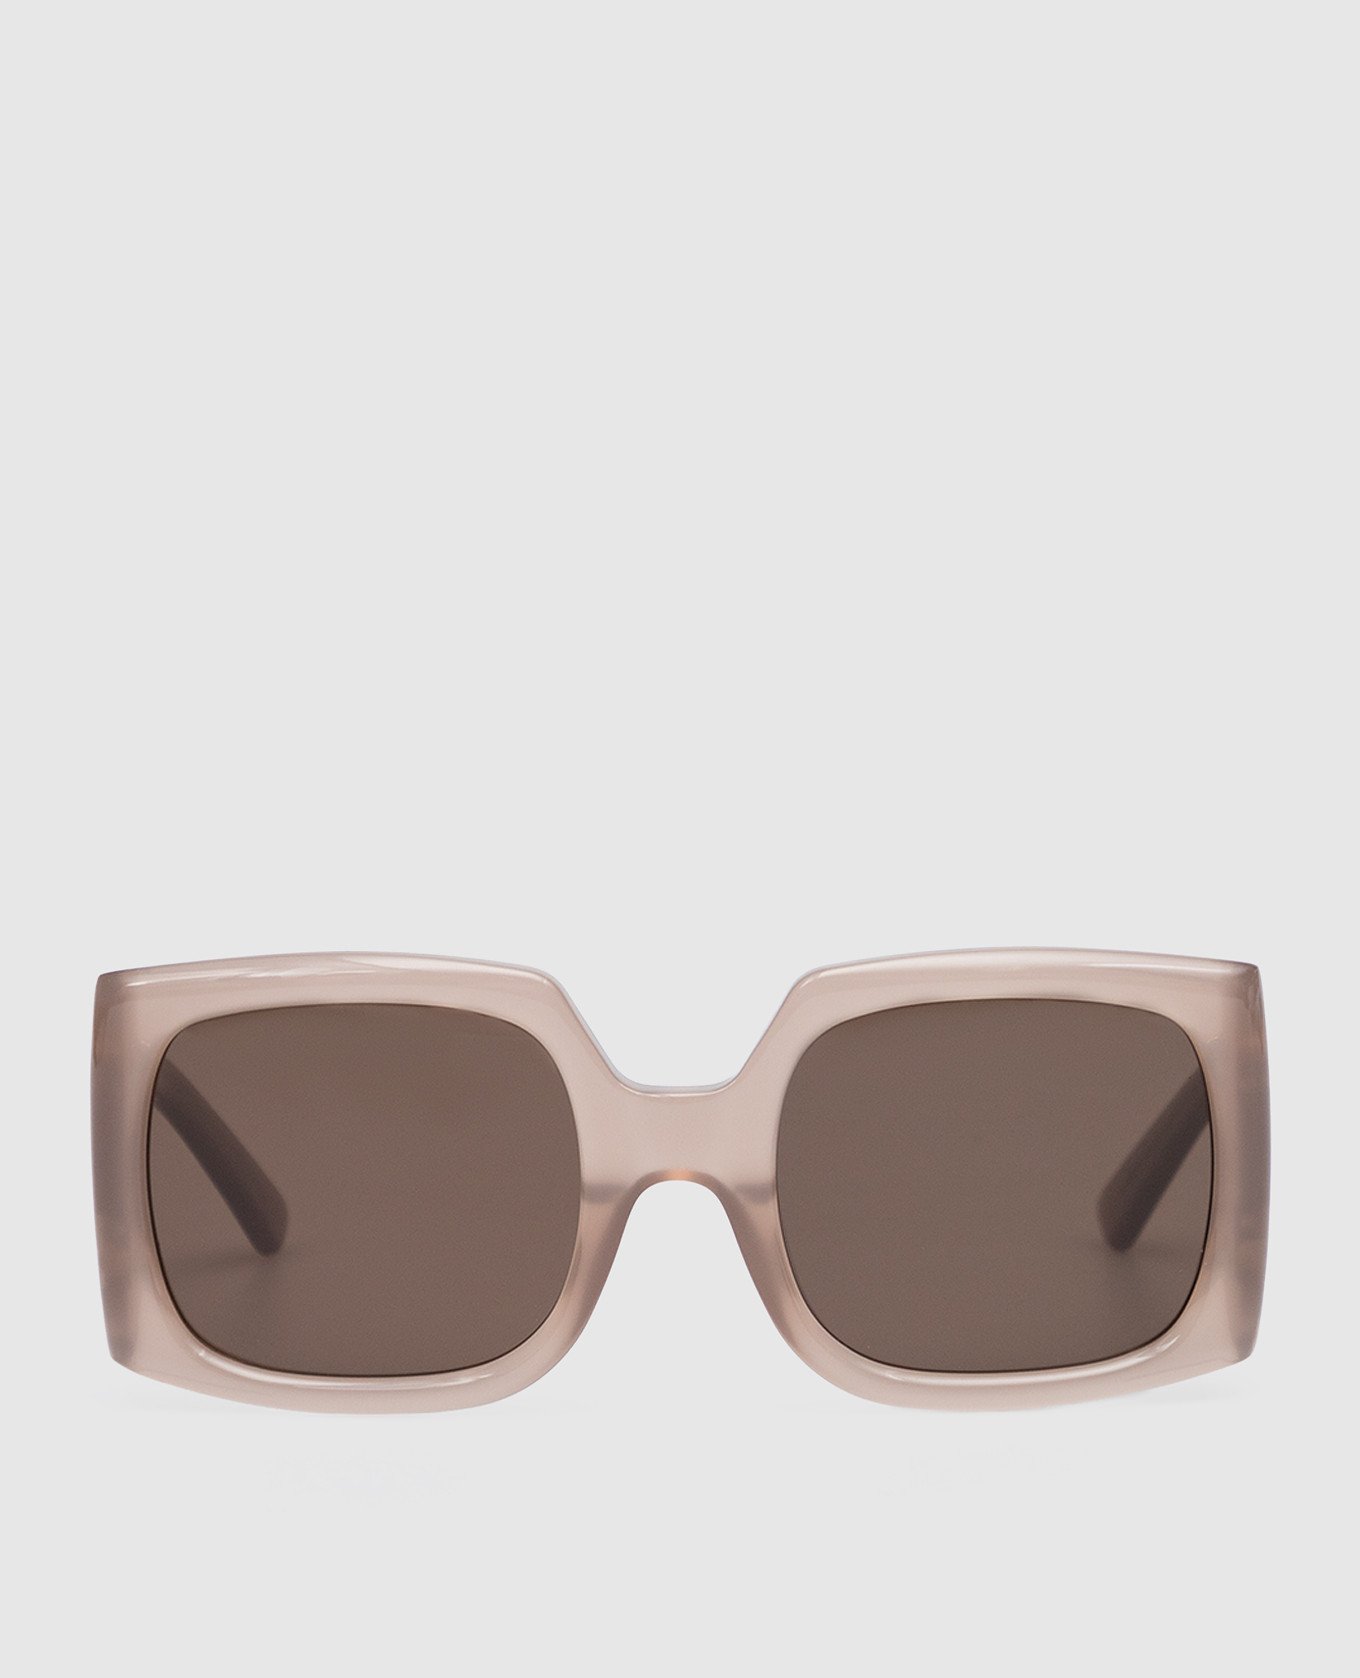 Brown Fhonix sunglasses with textured logo